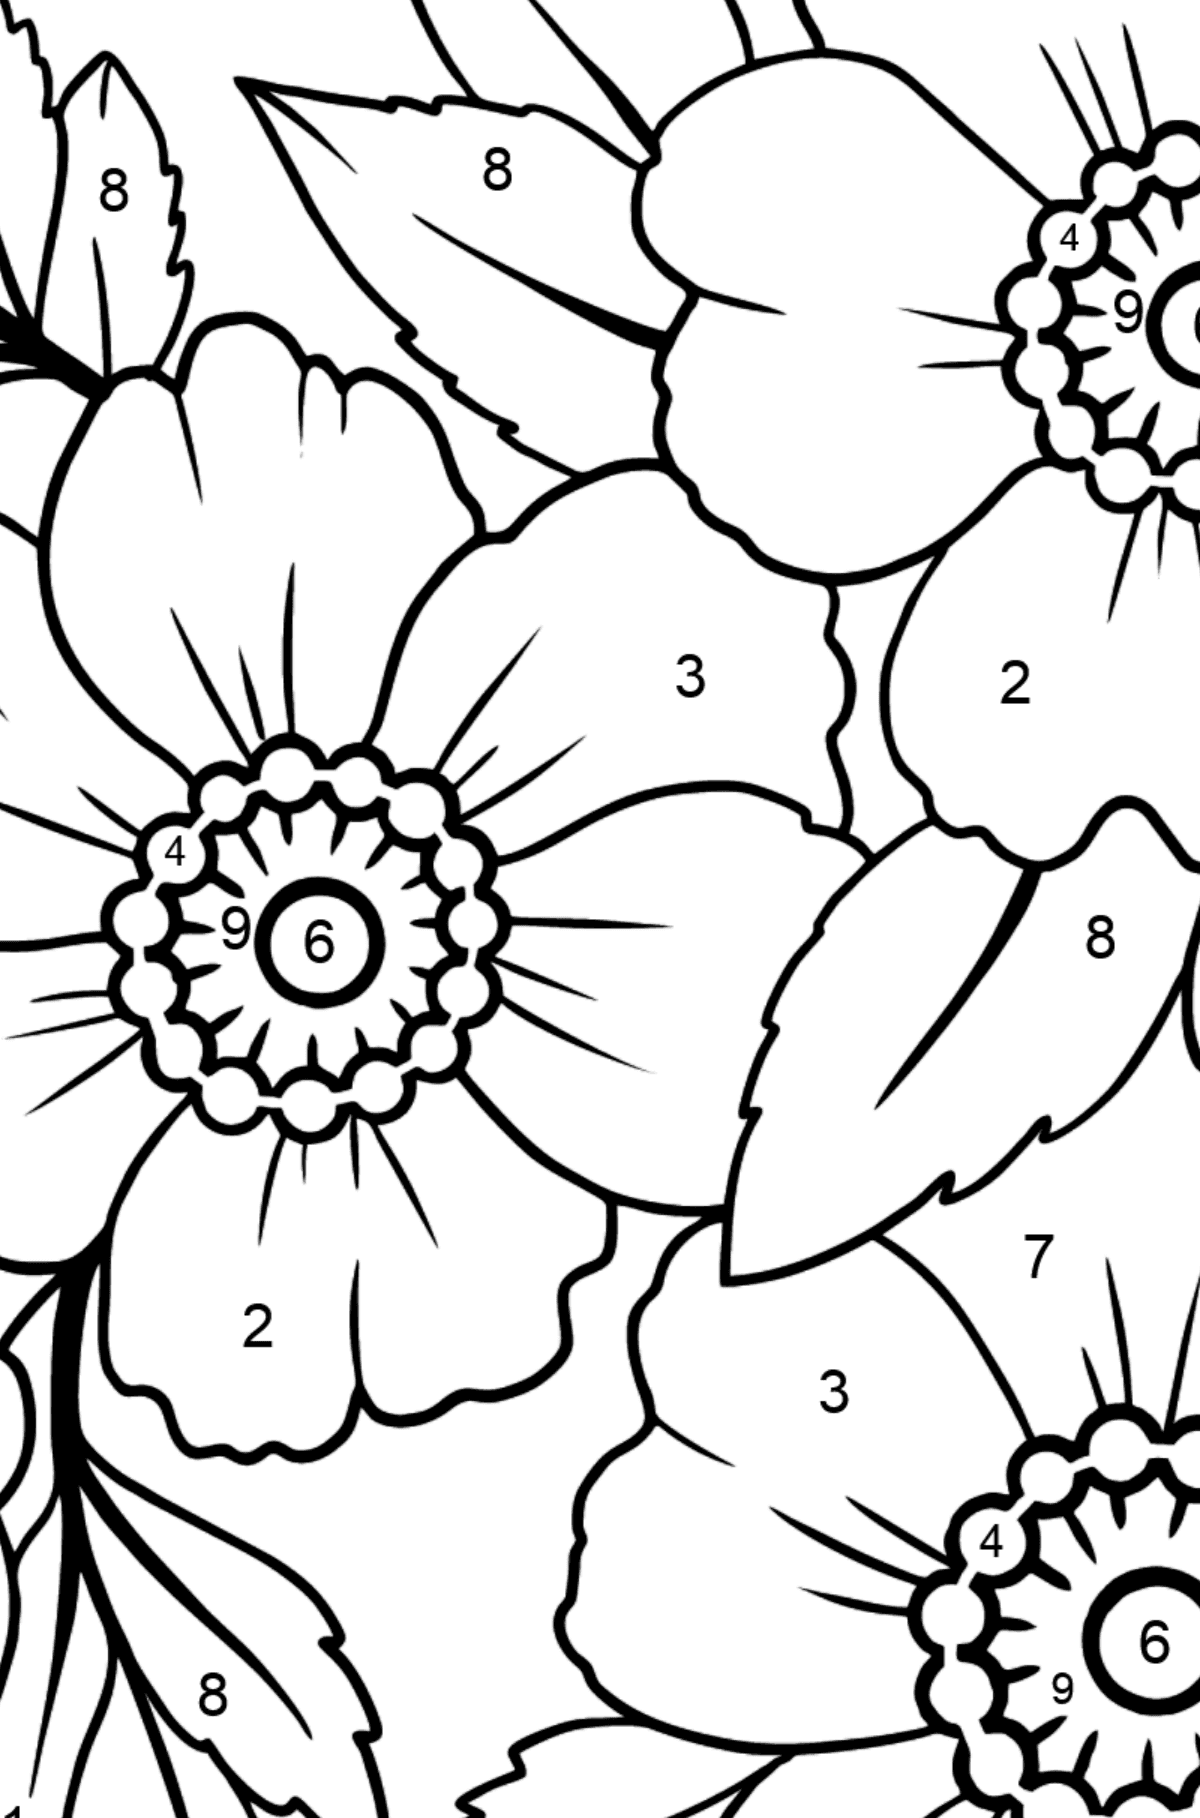 Flower Coloring Page - Japanese Anemone - Coloring by Numbers for Kids